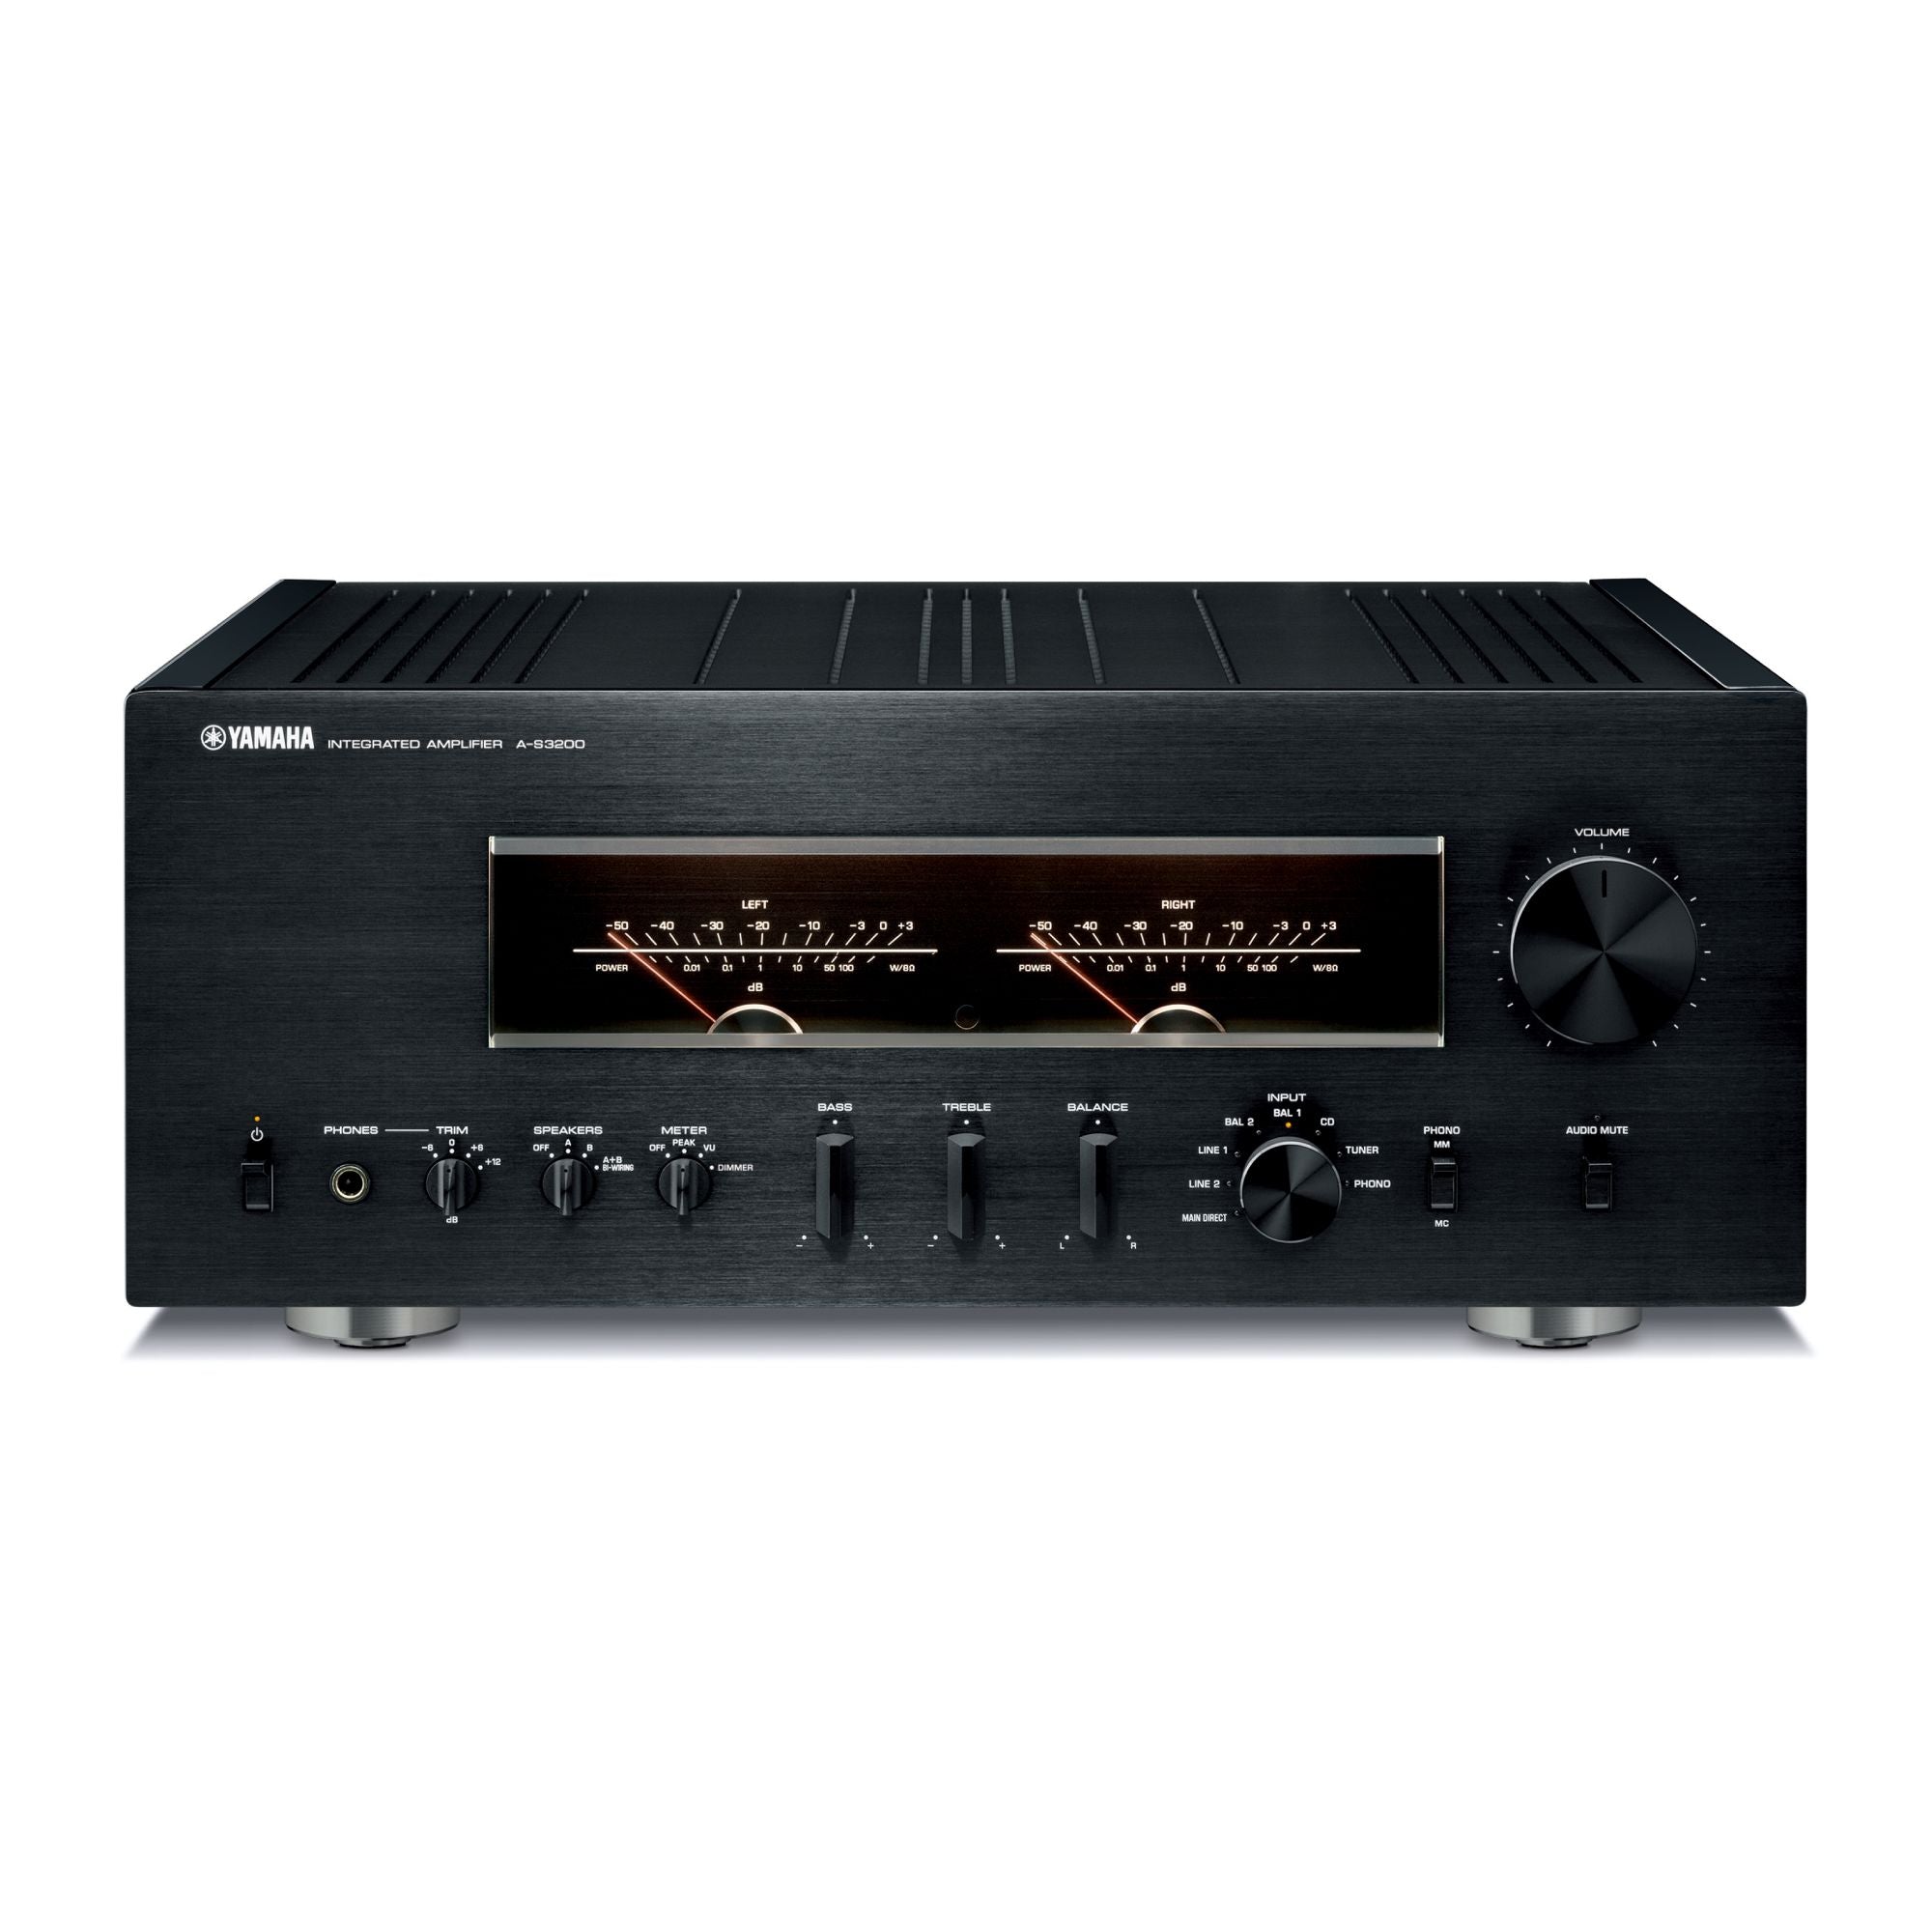 YAMAHA A-S3200 HIGH-END INTERGRATED STEREO AMPLIFIER - ON DEMONSTRATION